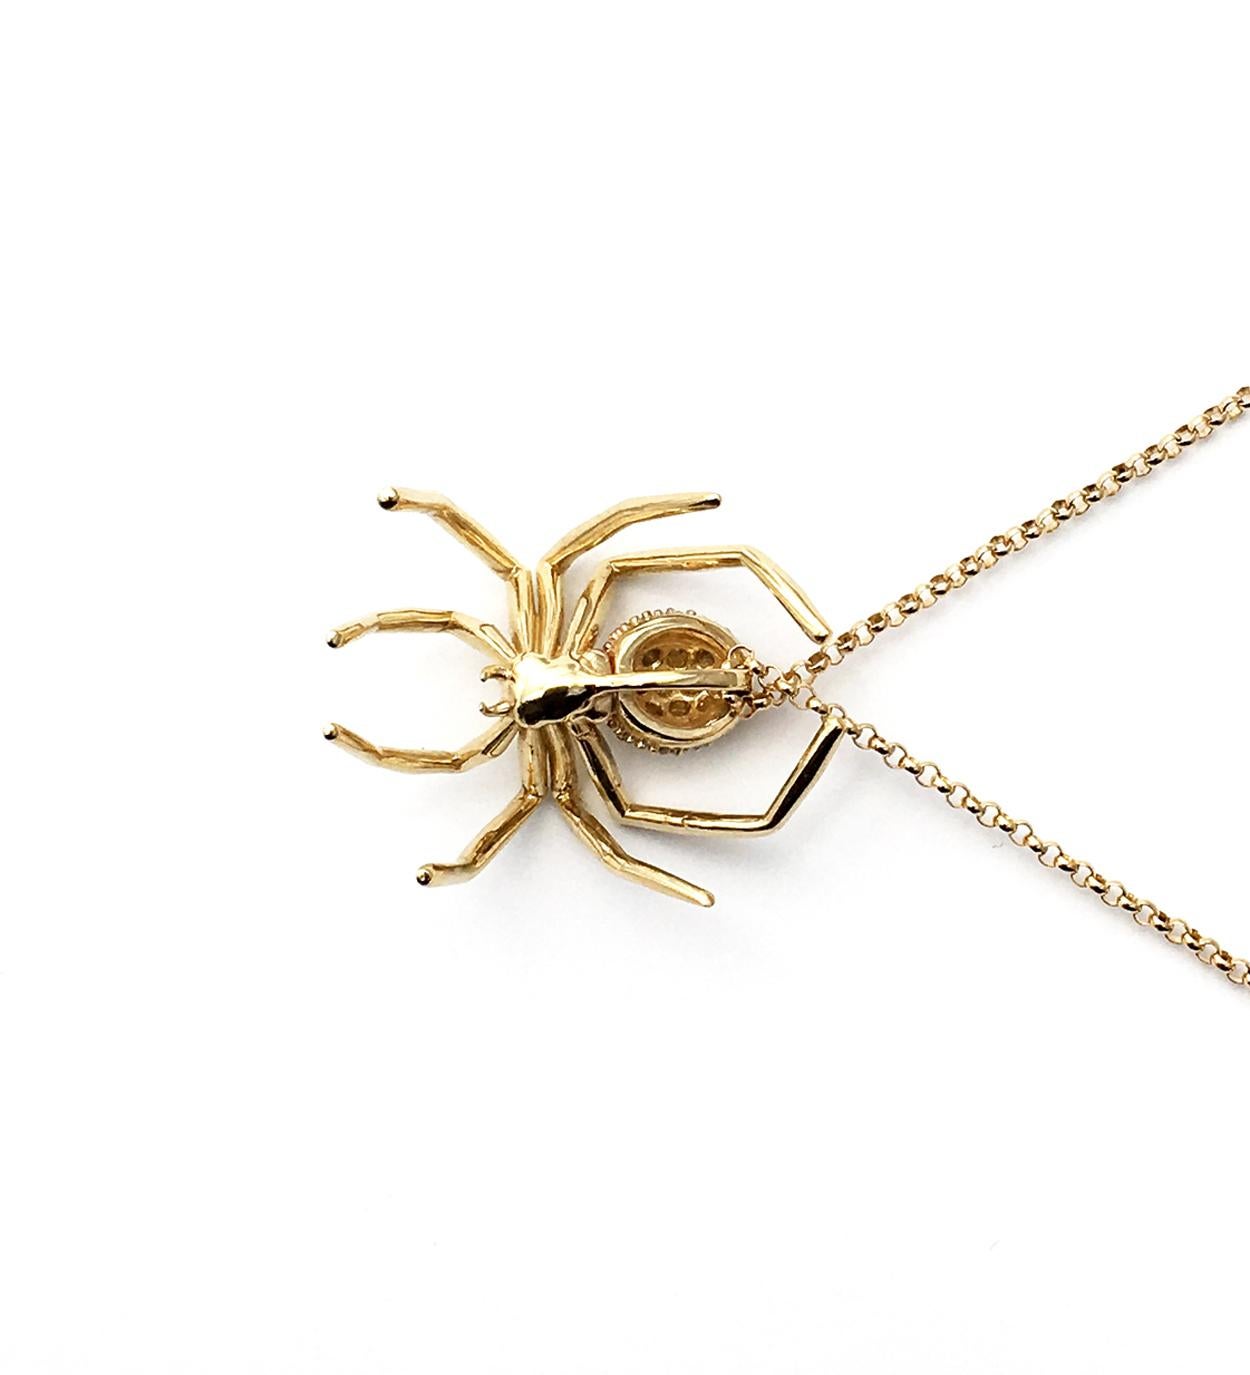 Artist Medium Spider Pendant / Yellow Gold Plated, White Sapphires For Sale